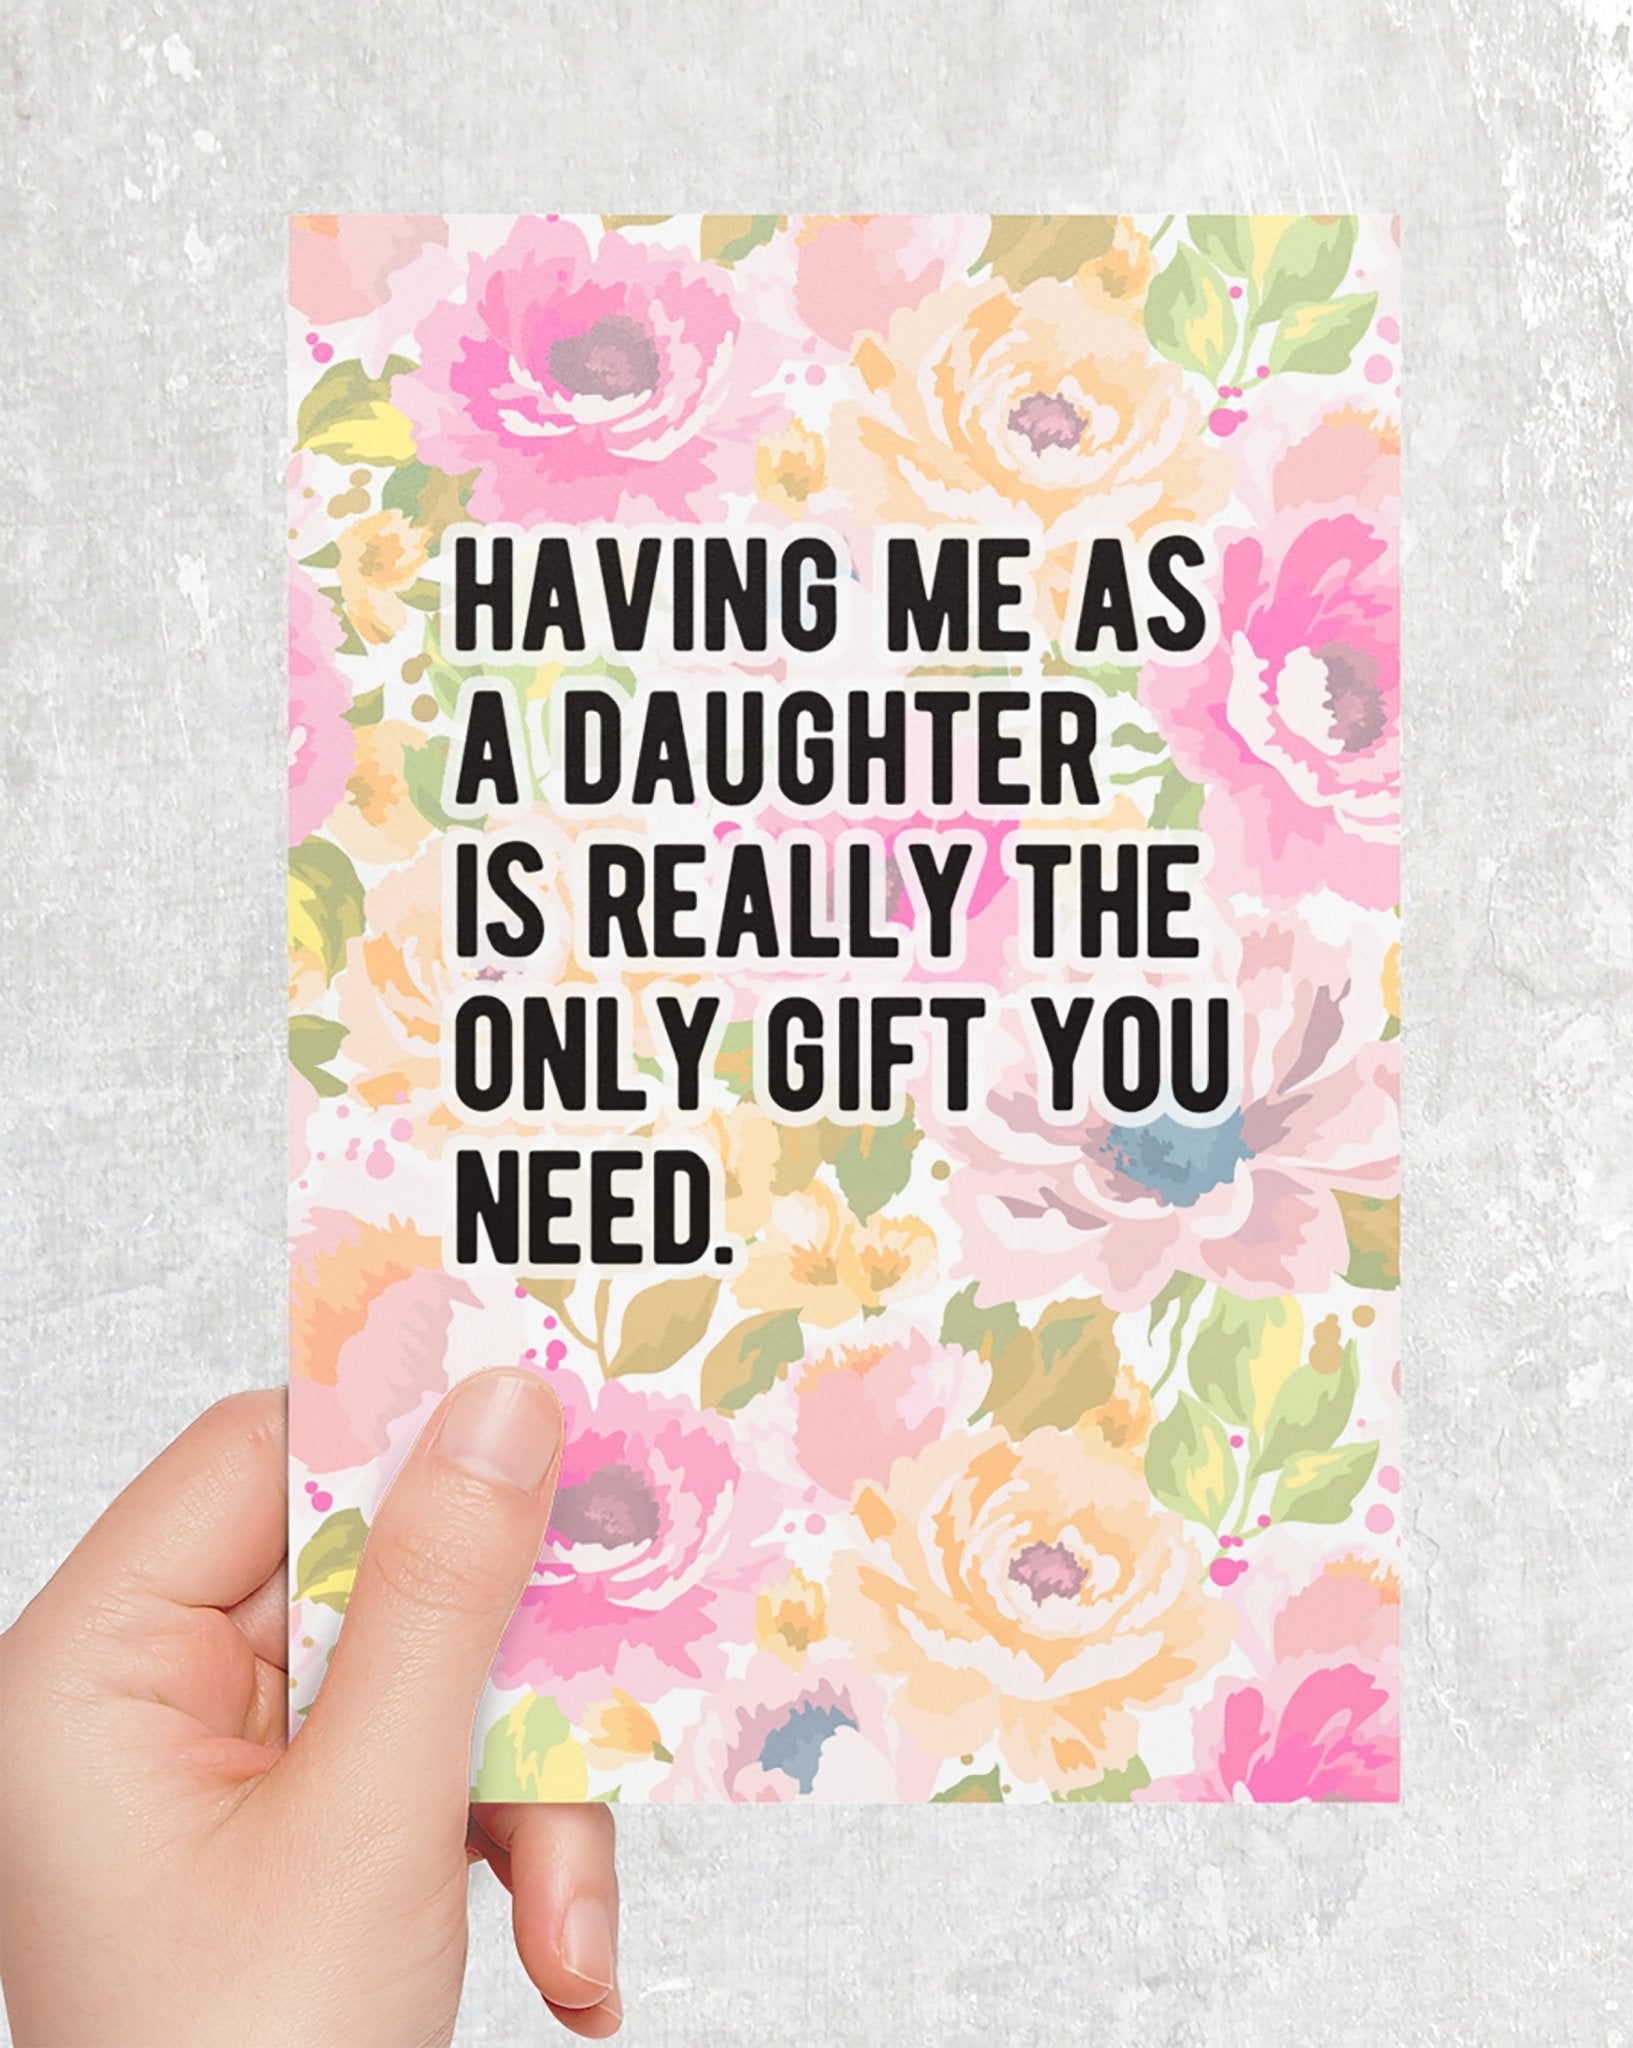 Having Me As A Daughter Is Really The Only Gift You Need Greeting Card - UntamedEgo LLC.